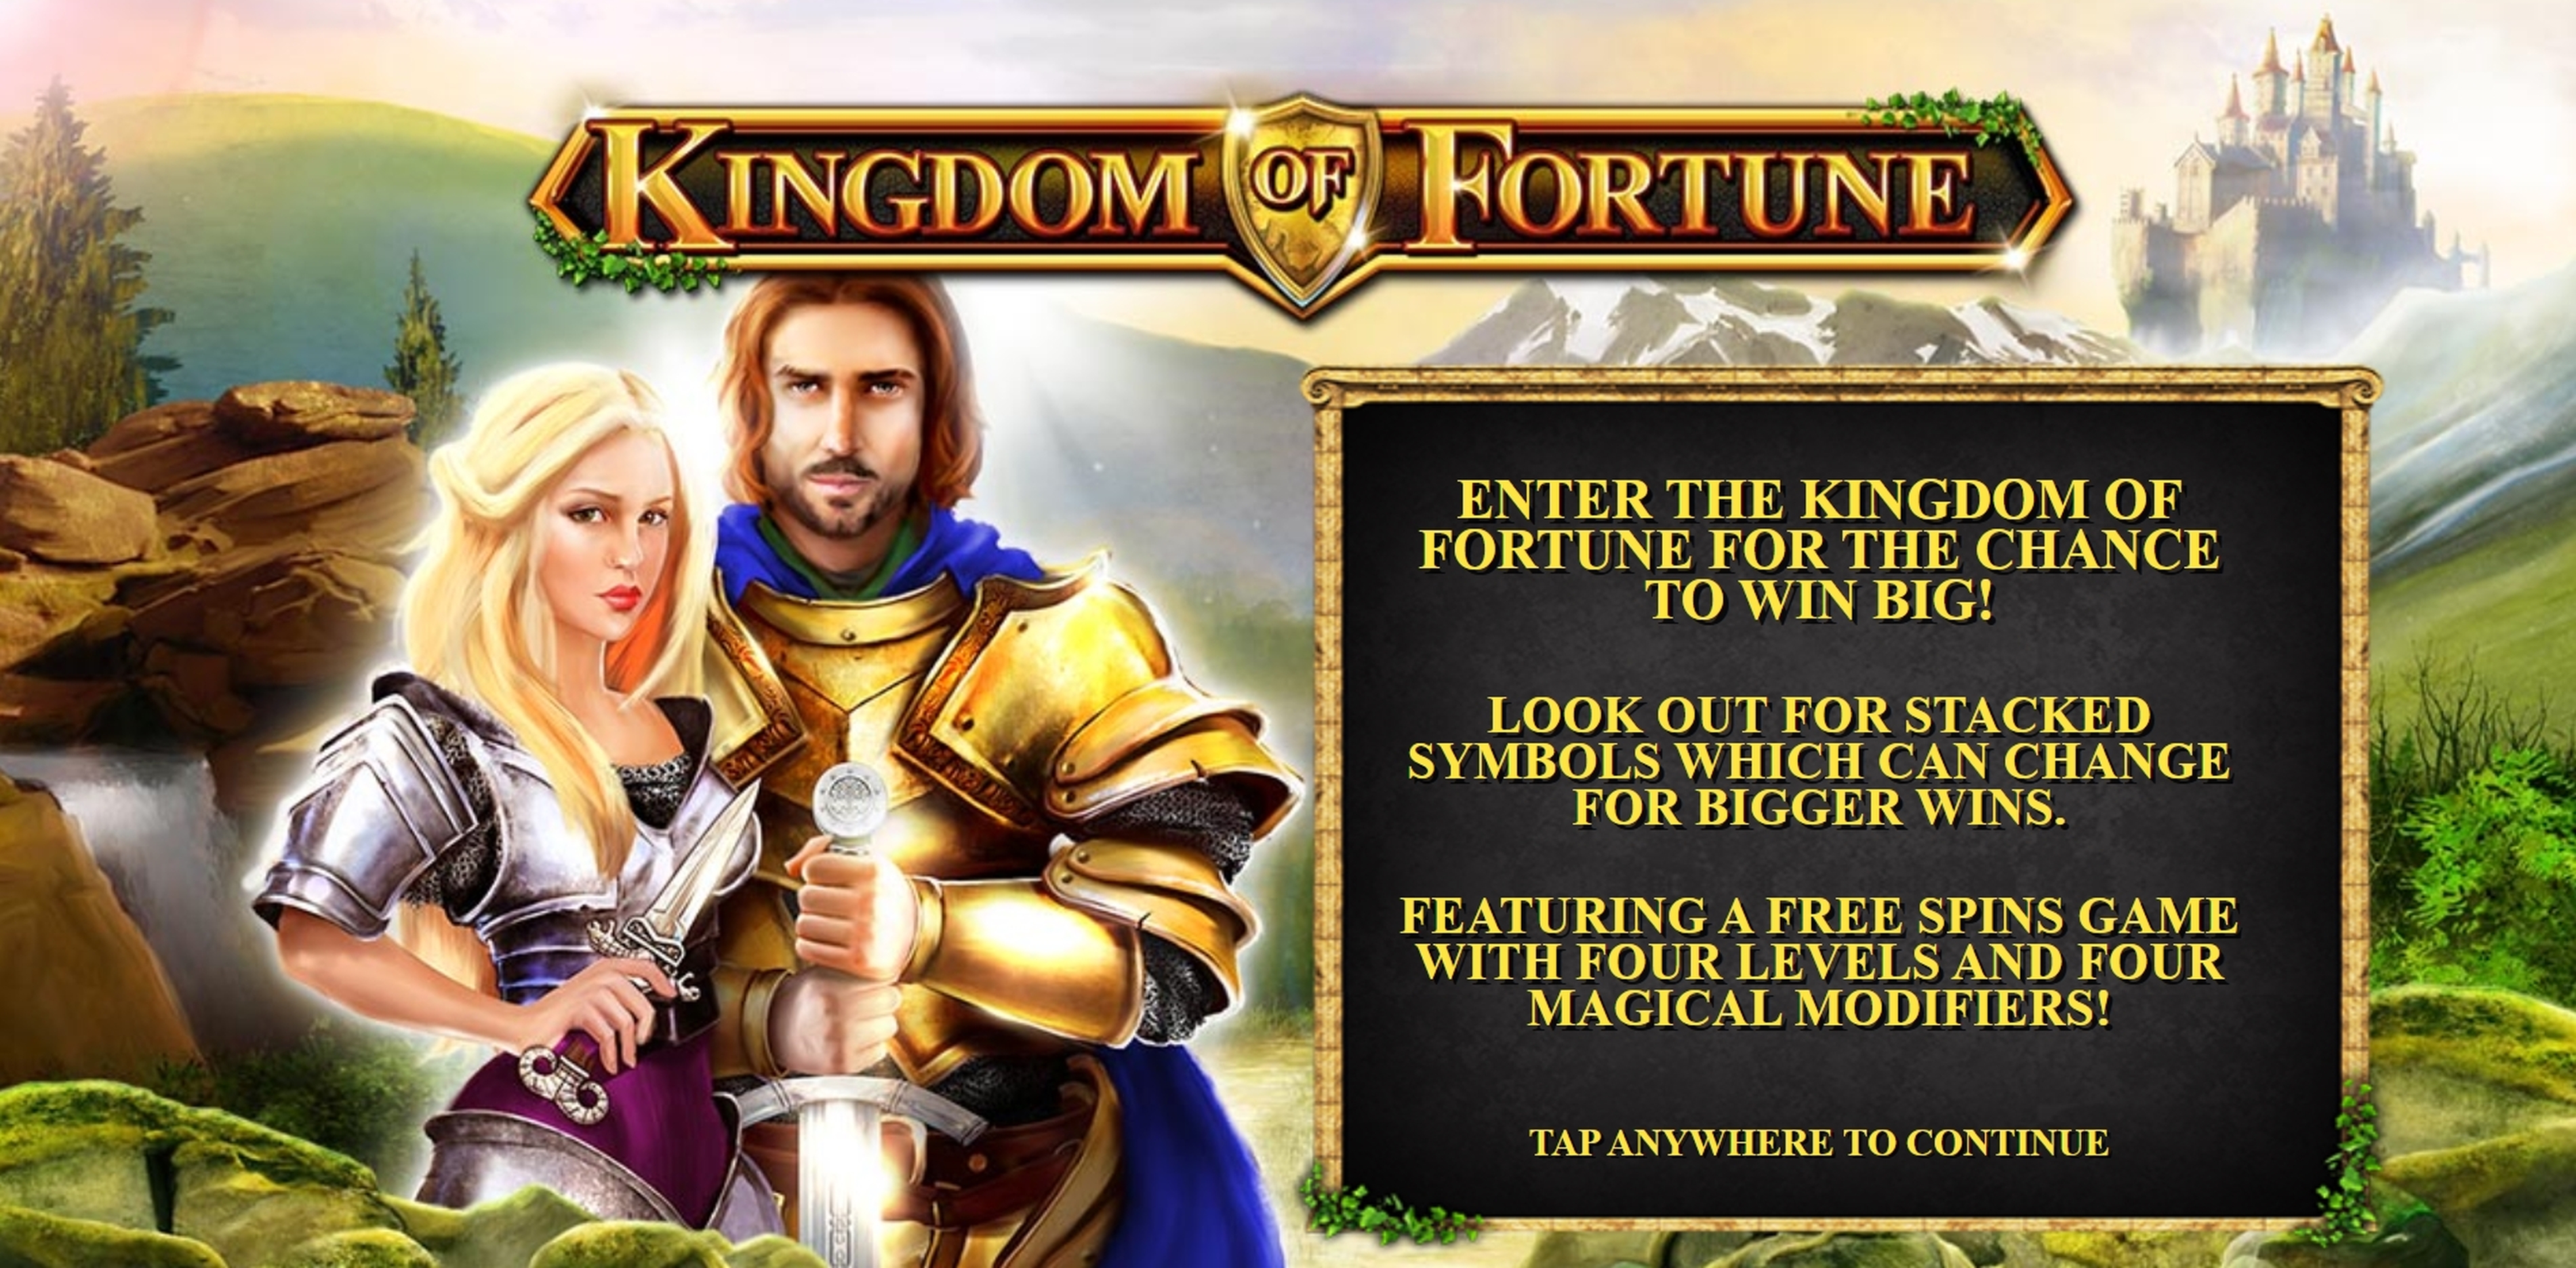 Play Kingdom of Fortune Free Casino Slot Game by Inspired Gaming